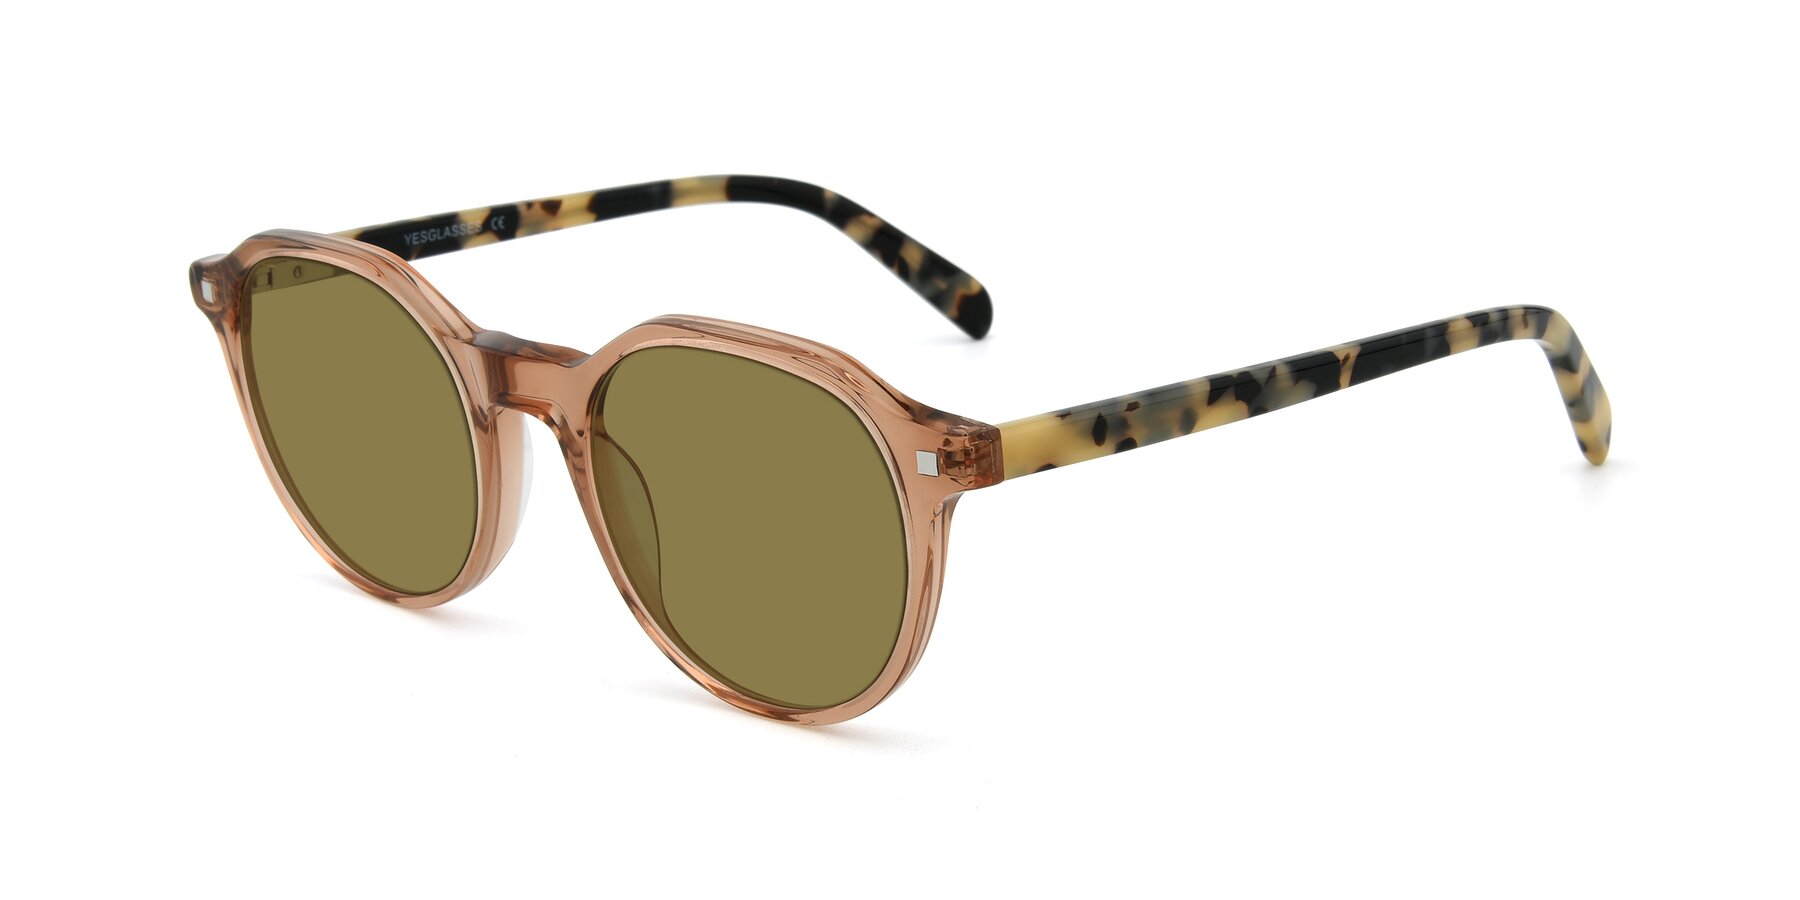 Angle of 17425 in Transparent Caramel with Brown Polarized Lenses